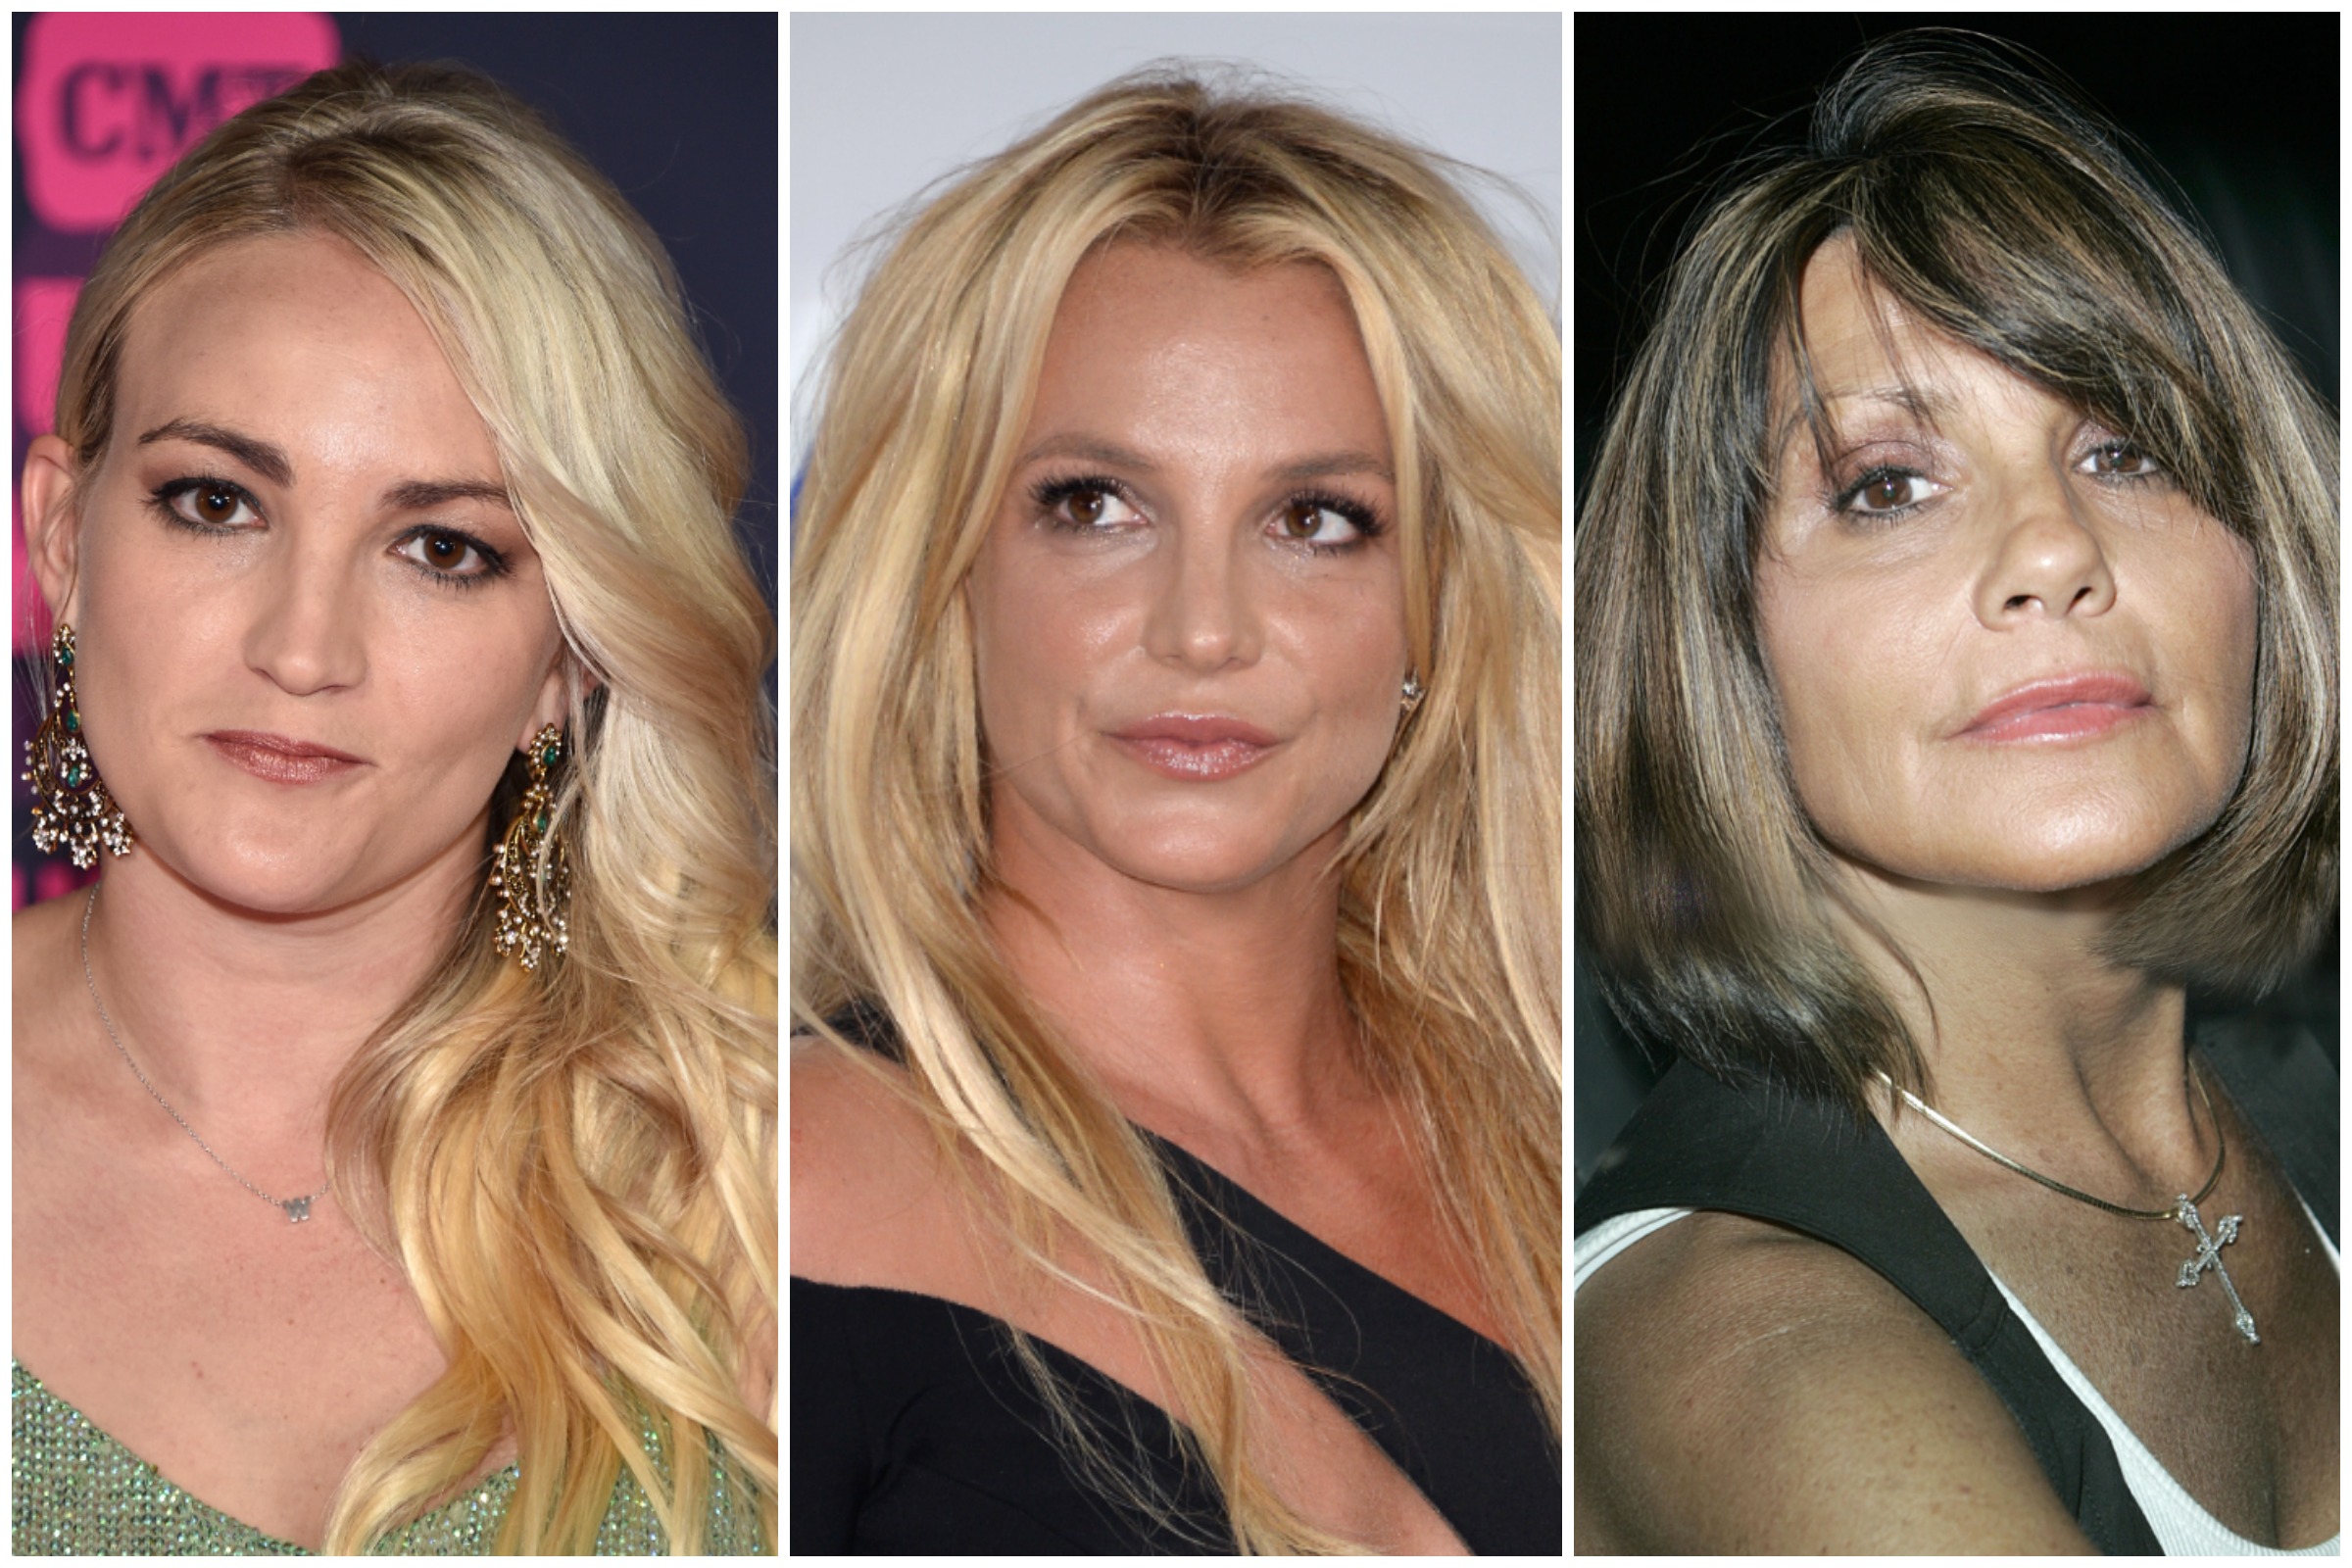 Britney Spears Says She Could silent Maintain ‘Slapped’ Sister, Mom As Feud Escalates